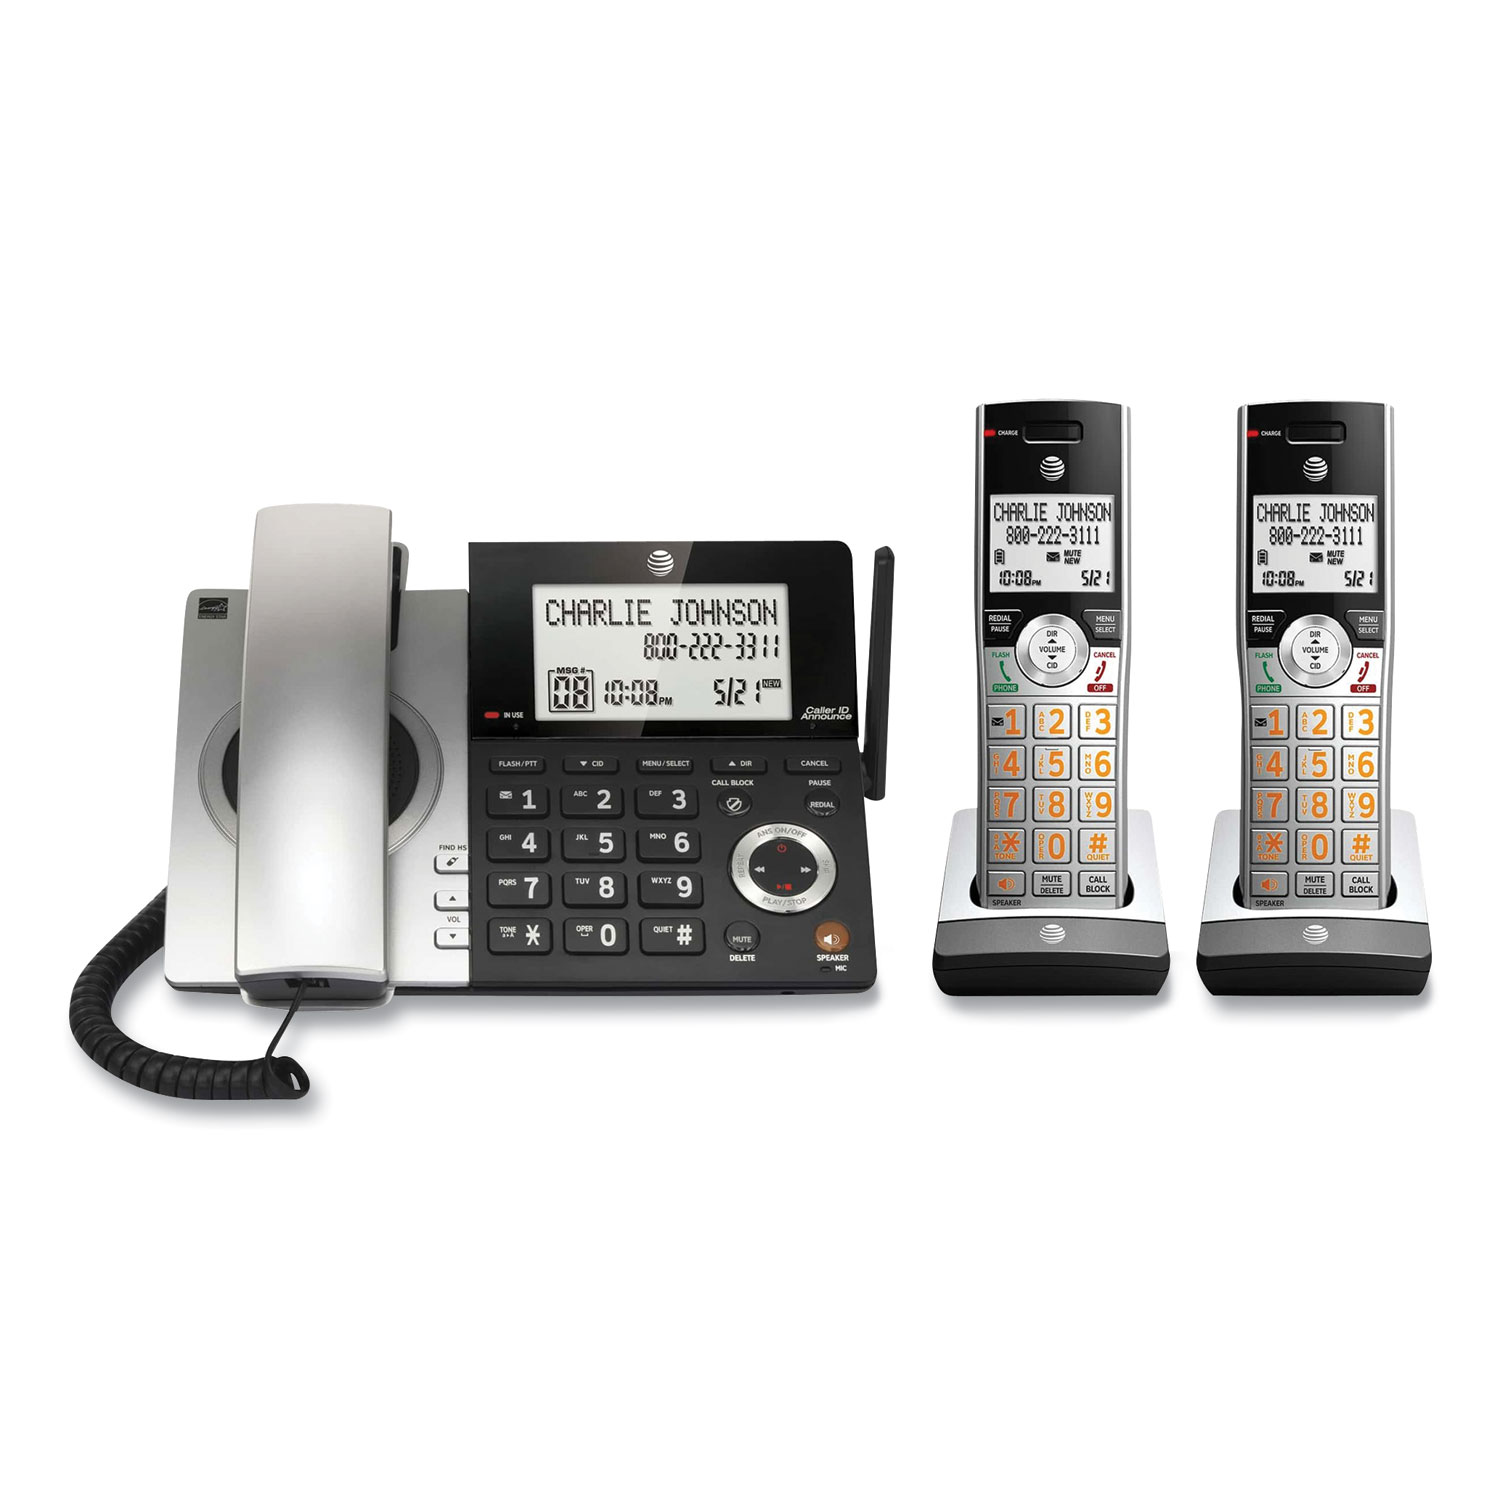 AT&T® CL84207 Corded/Cordless Phone, Corded Base Station and 2 Additional Hansets, Black/Silver